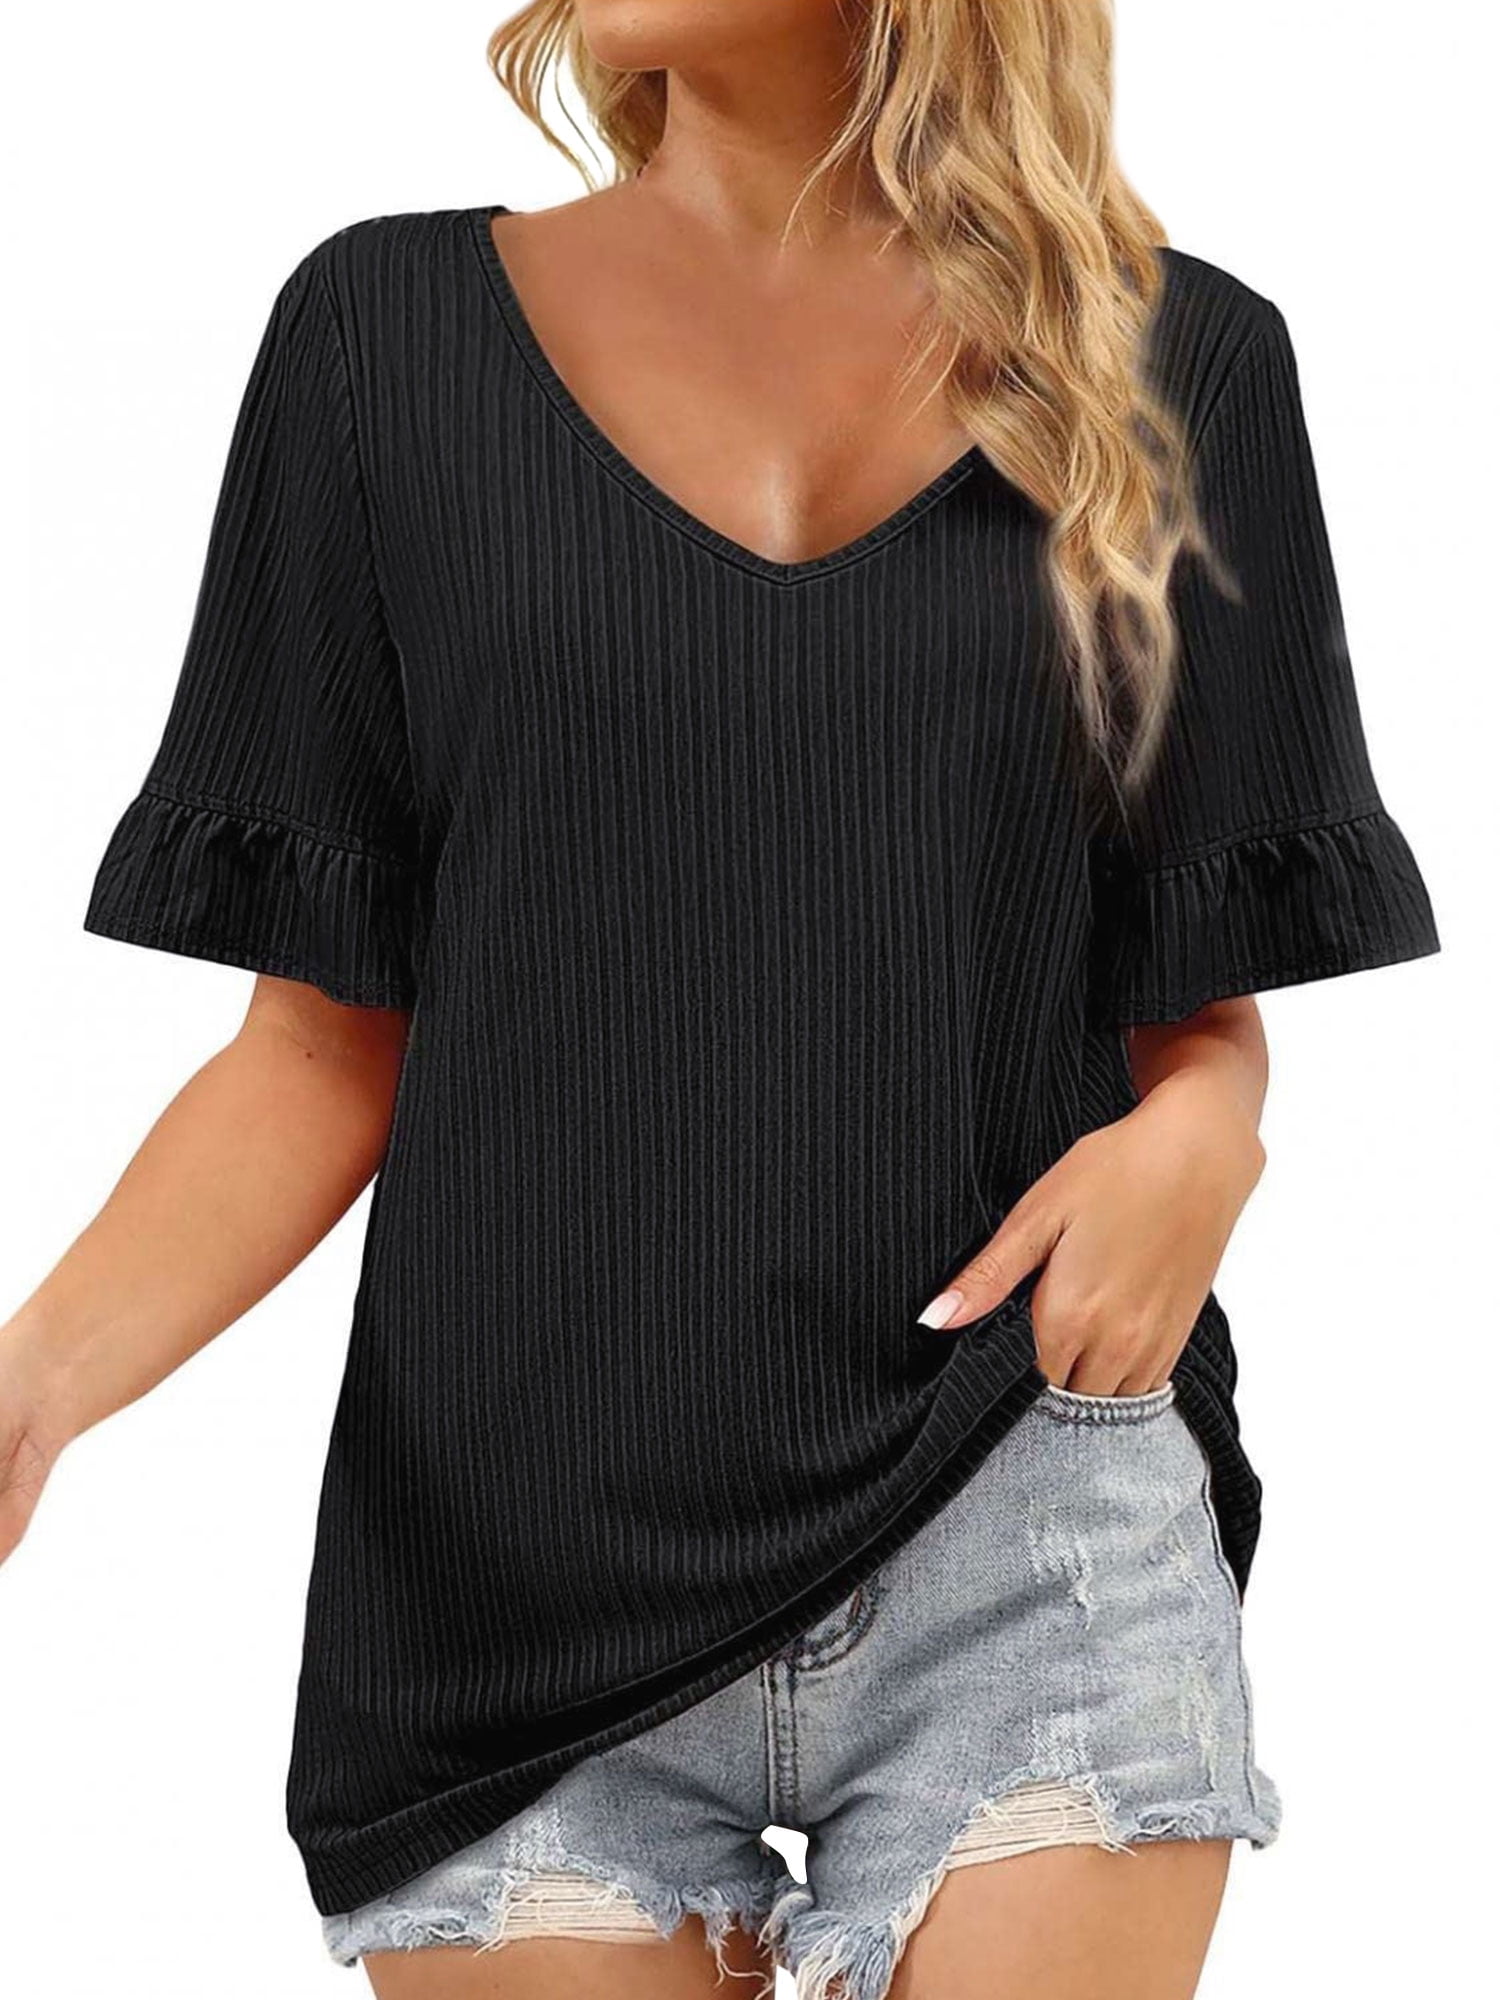 ZXZY Women Solid Color V Neck Ruffle Short Sleeve Knit Top 